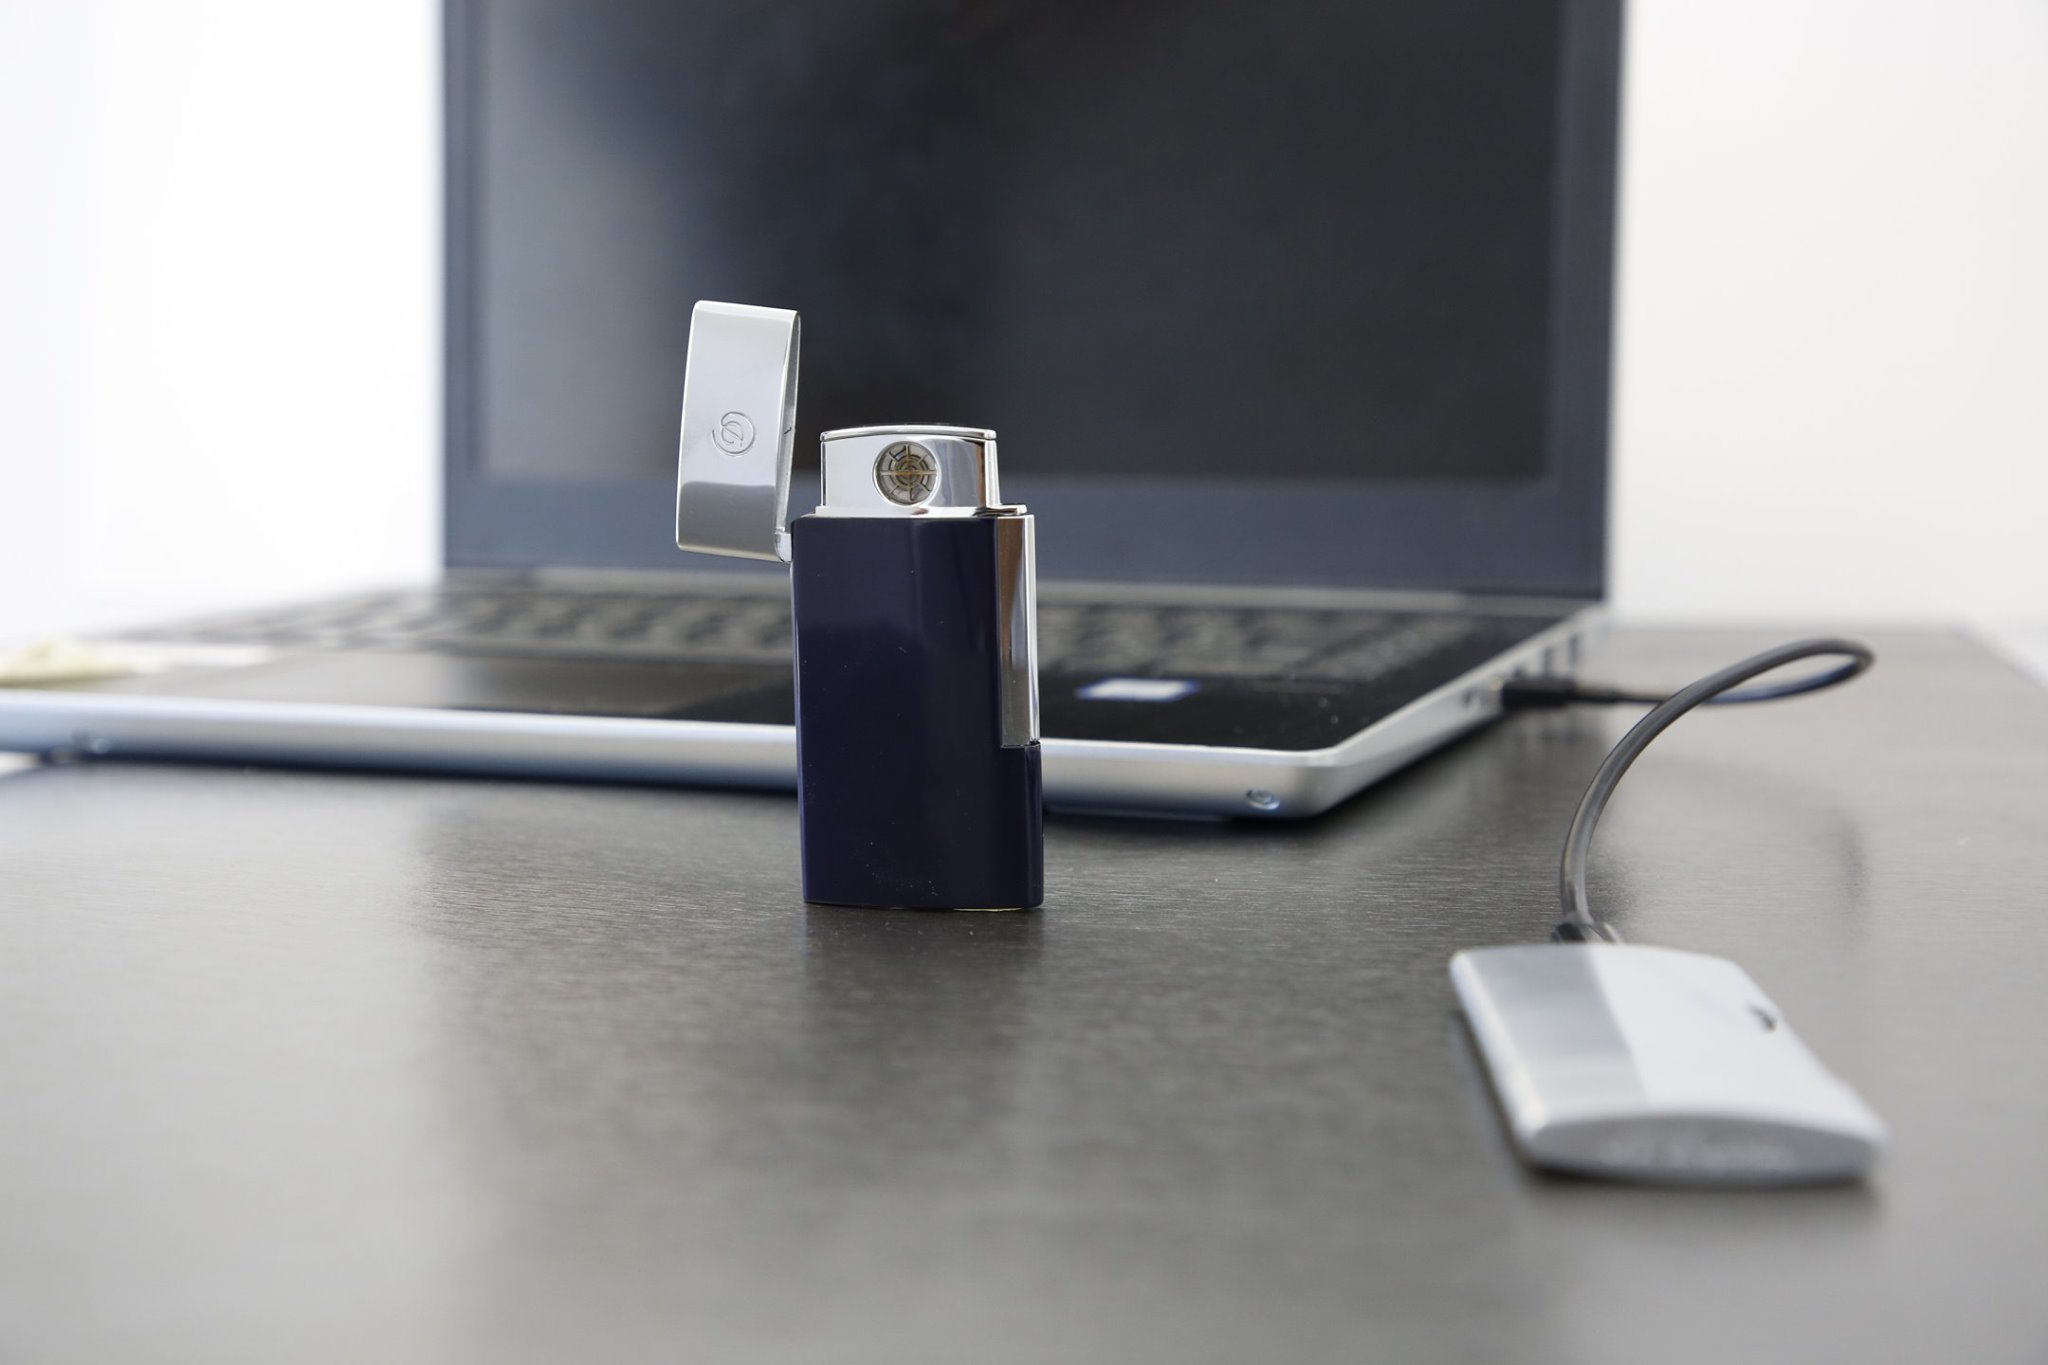 As easily rechargeable as a phone or a laptop : “Eslim” is the first luxury electronic lighter. It’s a lighter for everyone who loves technology and great design, fitting into your lifestyle, indoors or outdoors, and in all weathers.